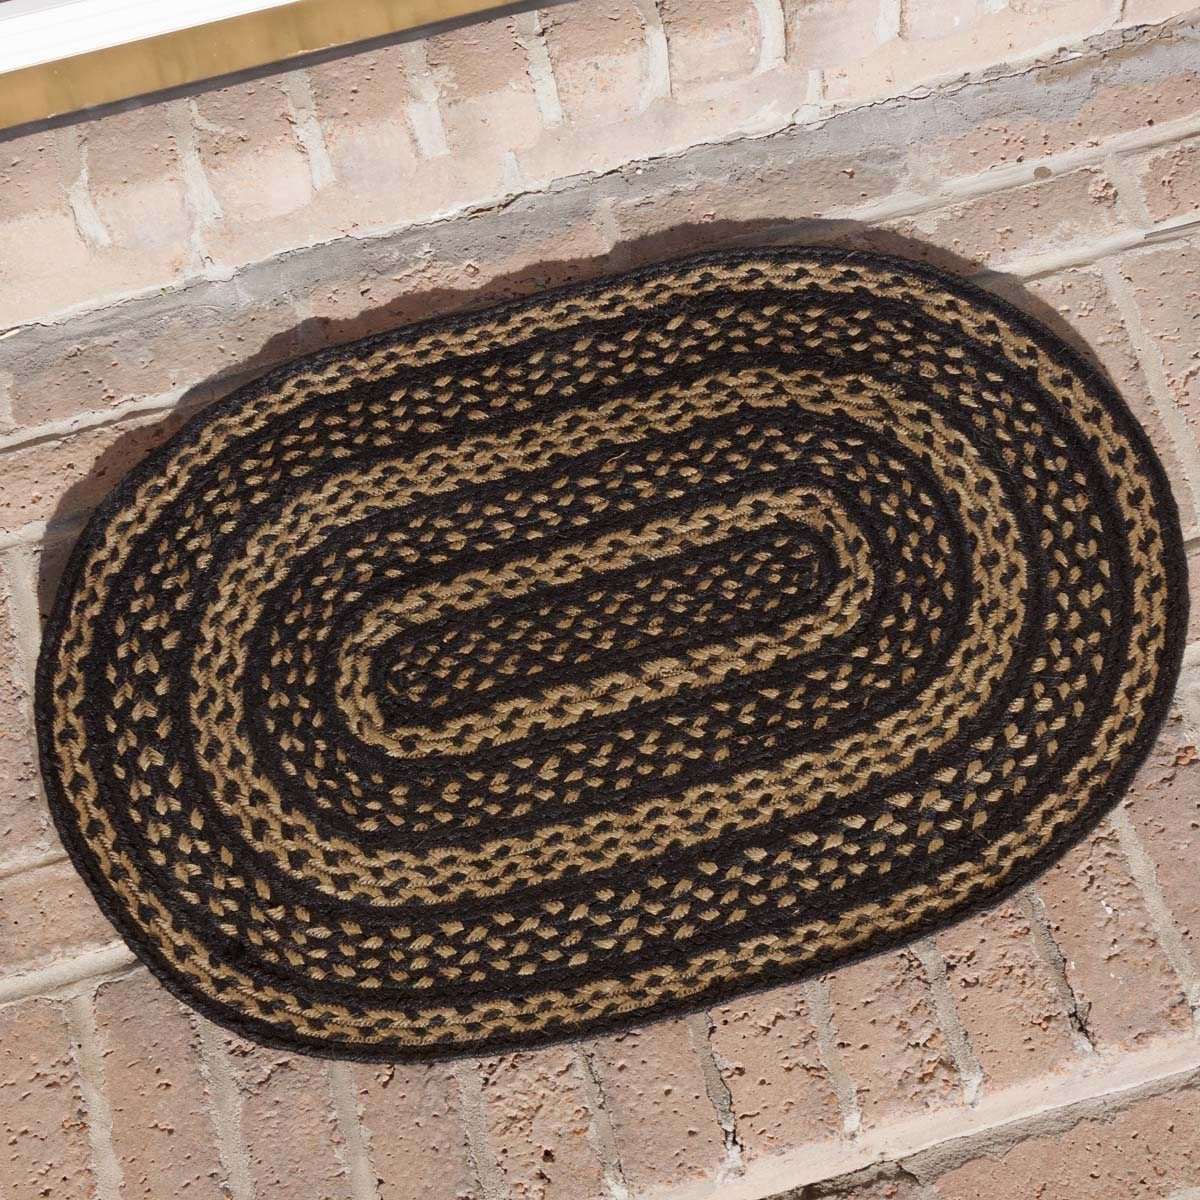 Farmhouse Jute Braided Rugs Oval VHC Brands Rugs VHC Brands 